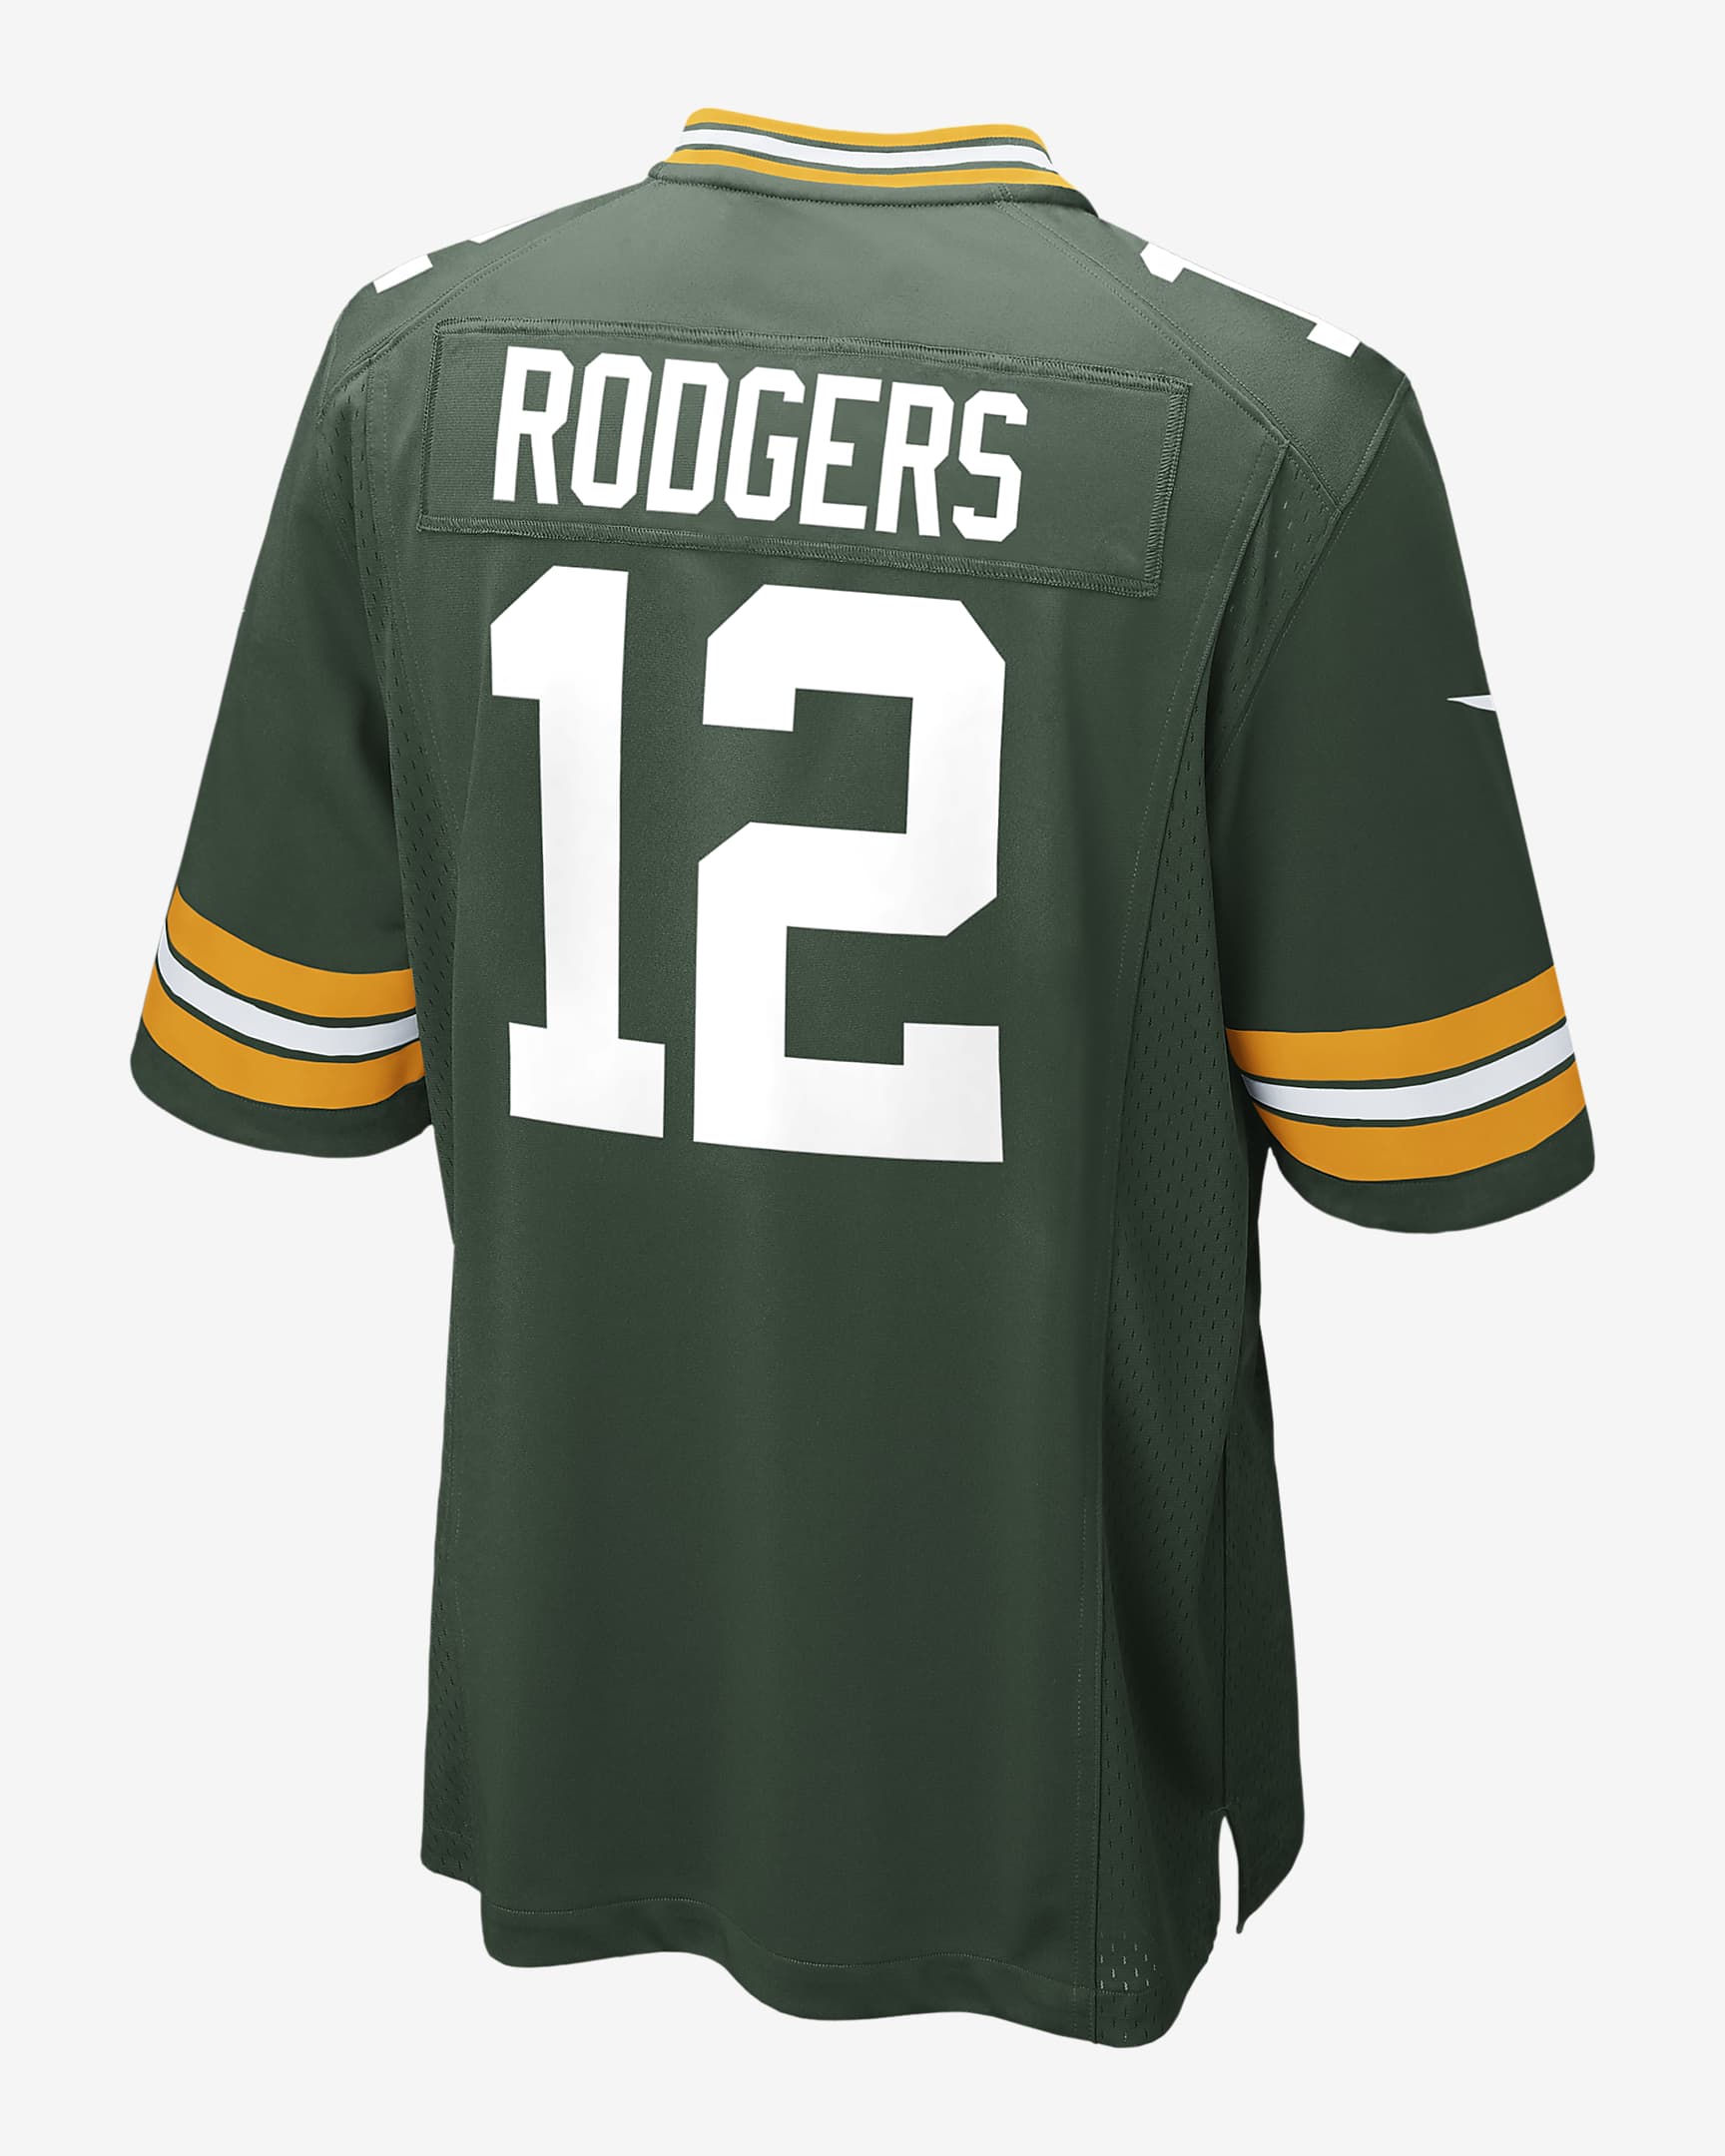 NFL Green Bay Packers (Aaron Rodgers) Men's Game American Football